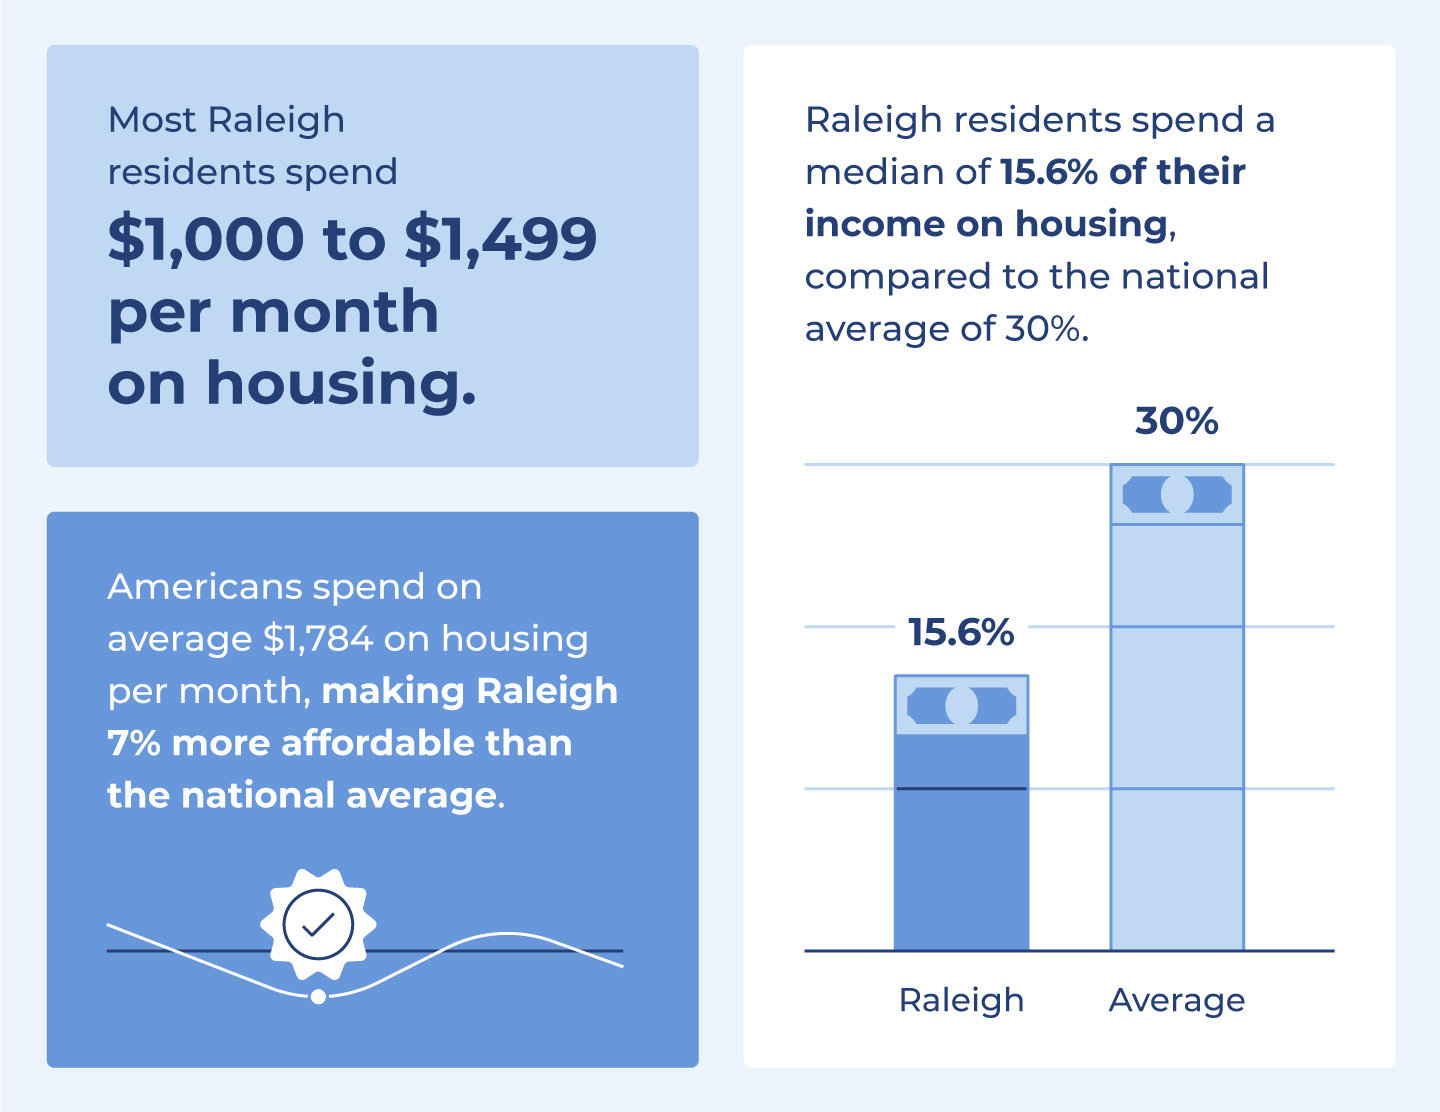 The majority of renters and homeowners in Raleigh spend $1,000 to $1,499 per month on housing. Americans spend on average $1,784 on housing per month.  Raleigh residents spend a median of 15.6% of their income on housing. On average, Americans dedicate 30% of their budget to housing.